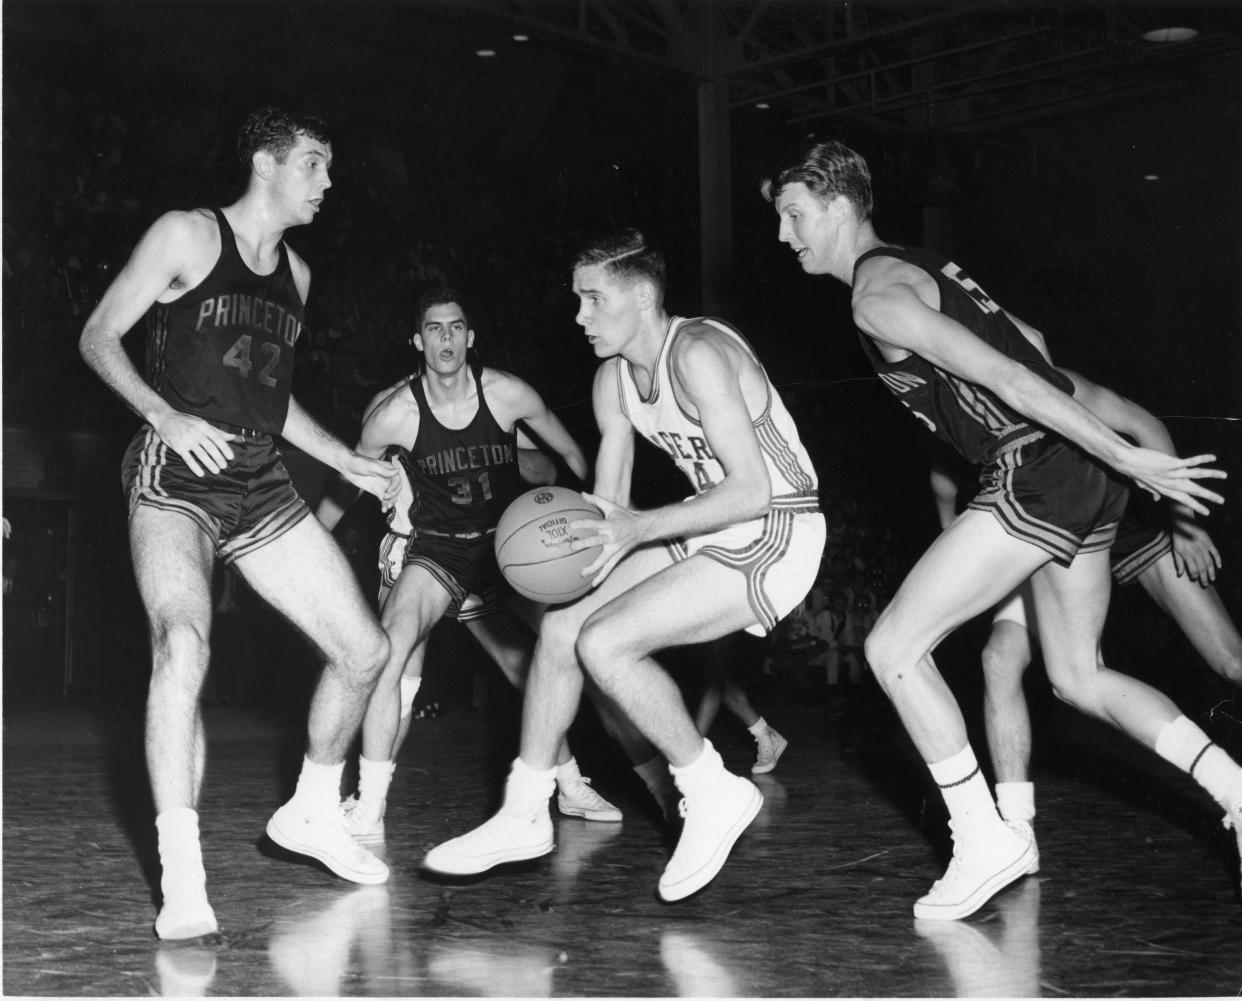 Rutgers' Bob Lloyd (center, in white) drives against Princeton and Bill Bradley (No. 42) in an undated photo.